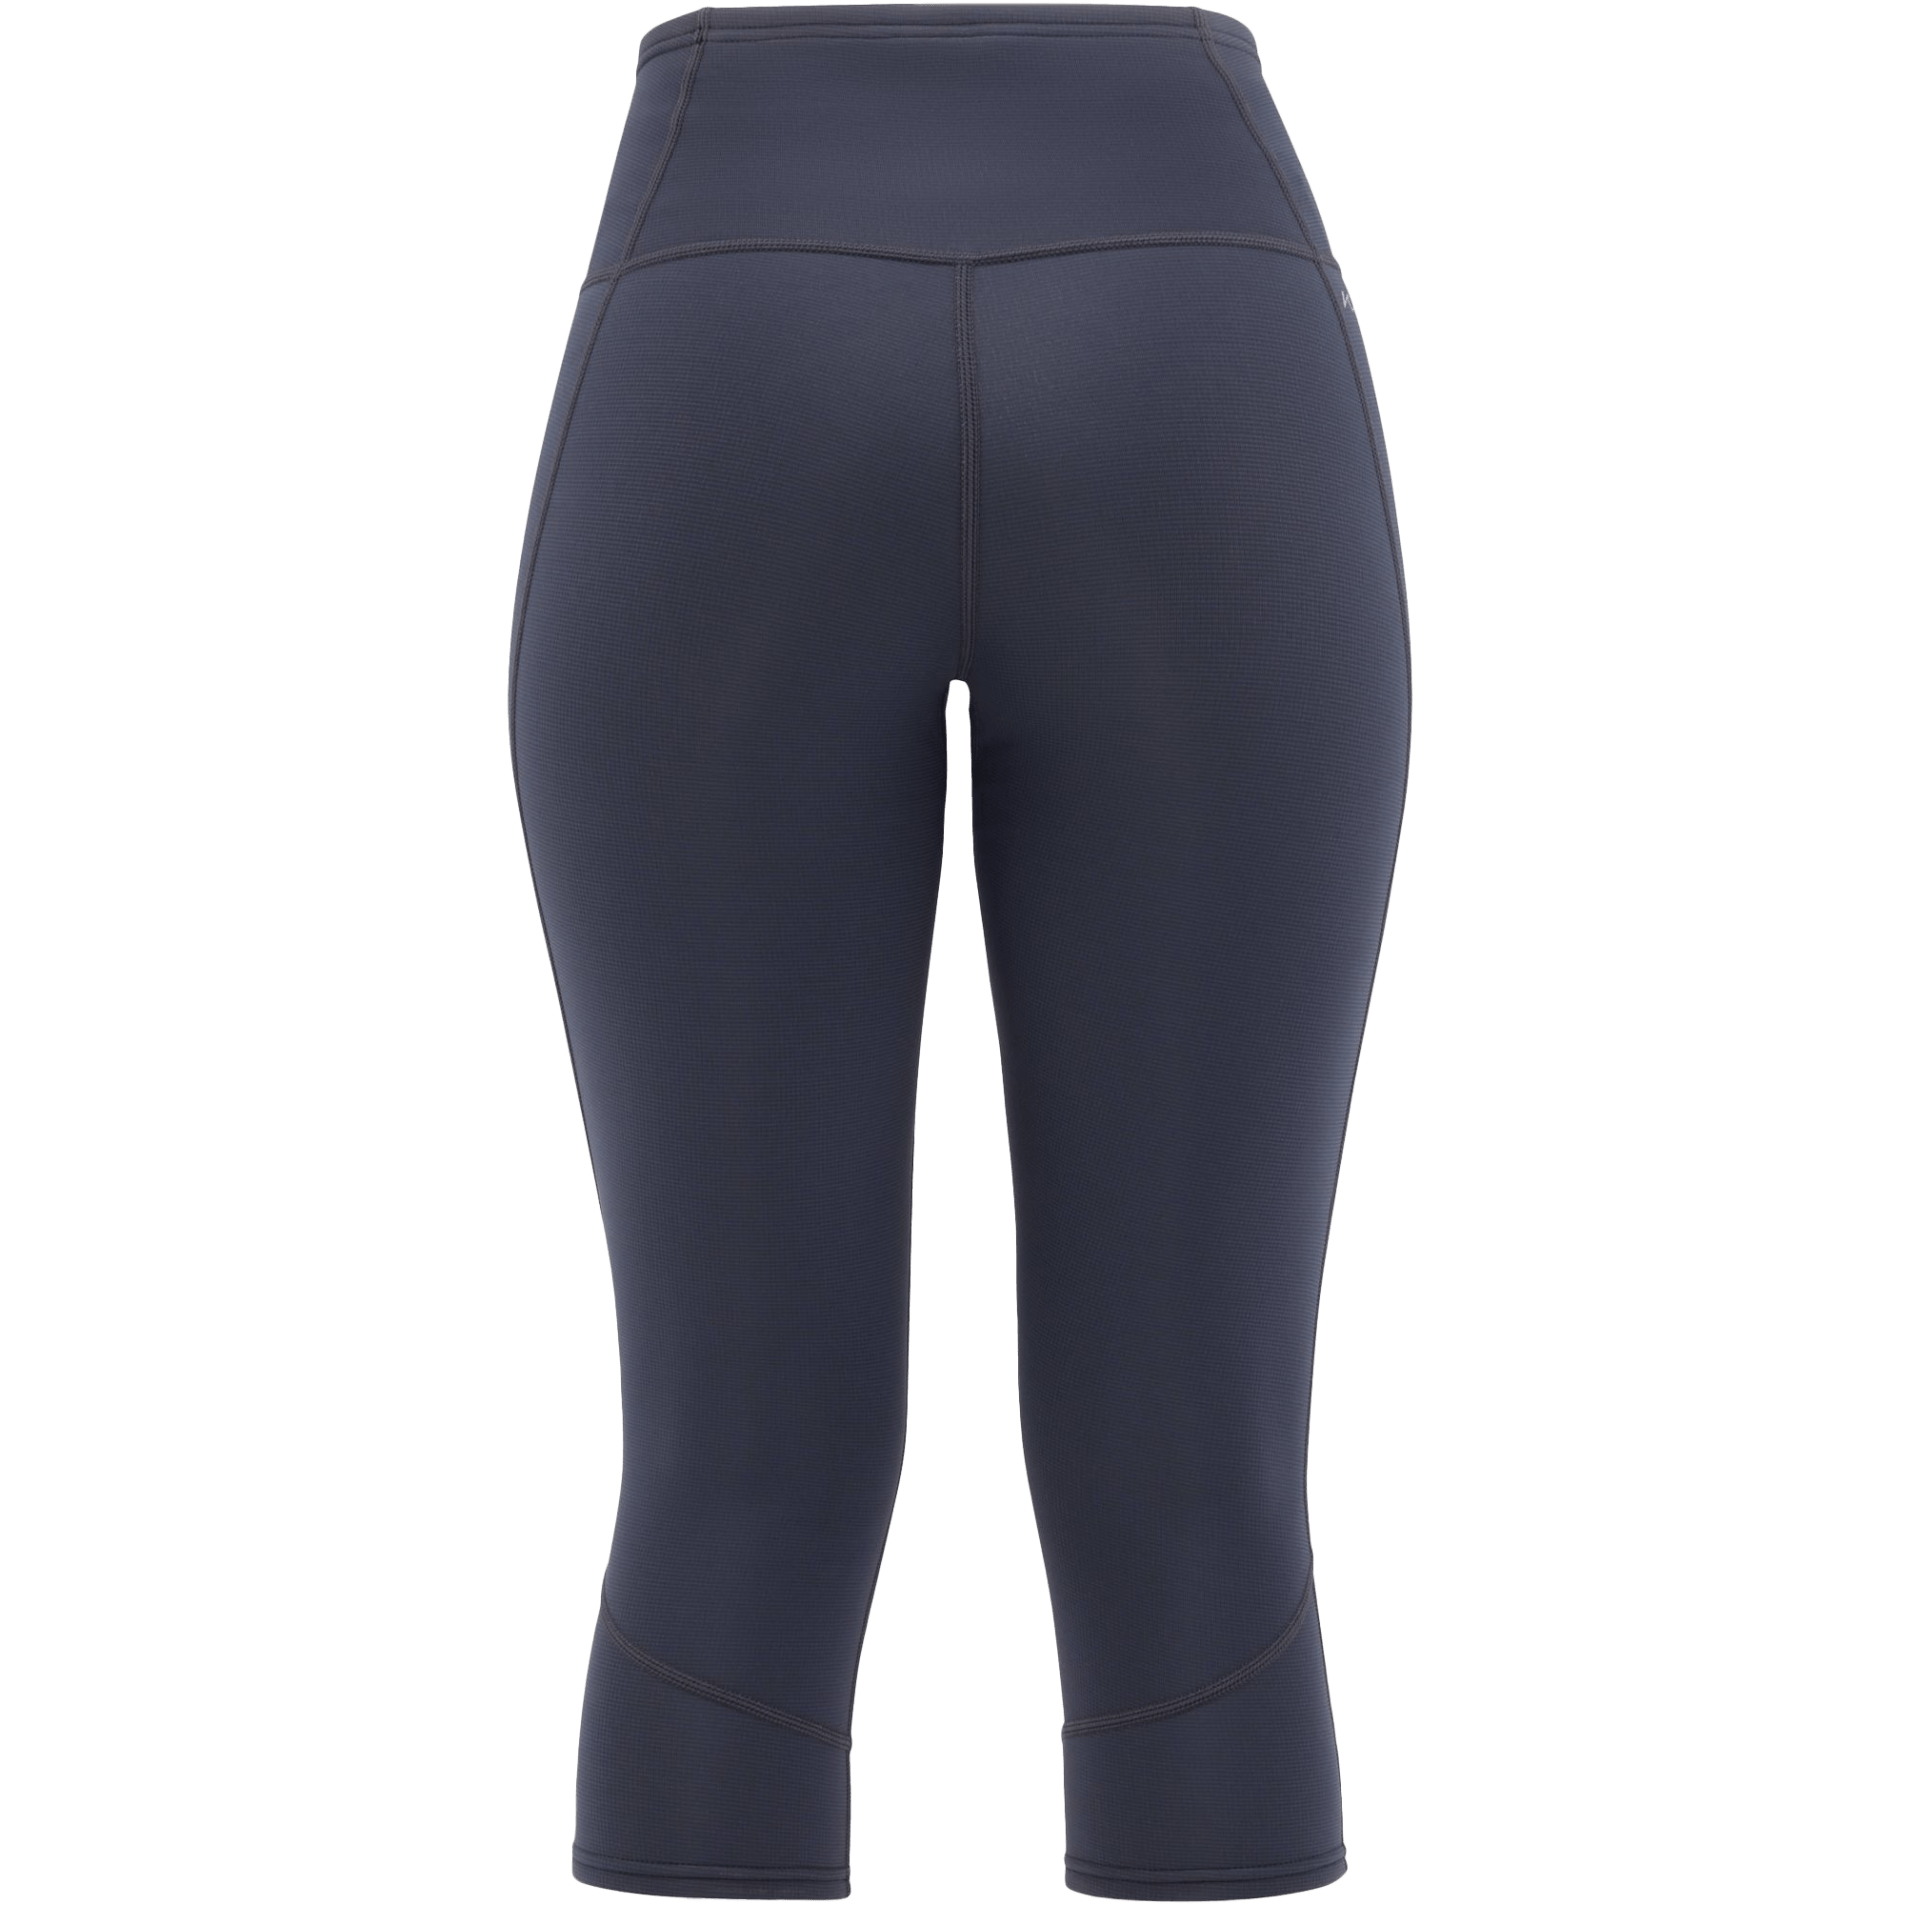 nrs_womens_hydroskin_05mm_capris_back.png